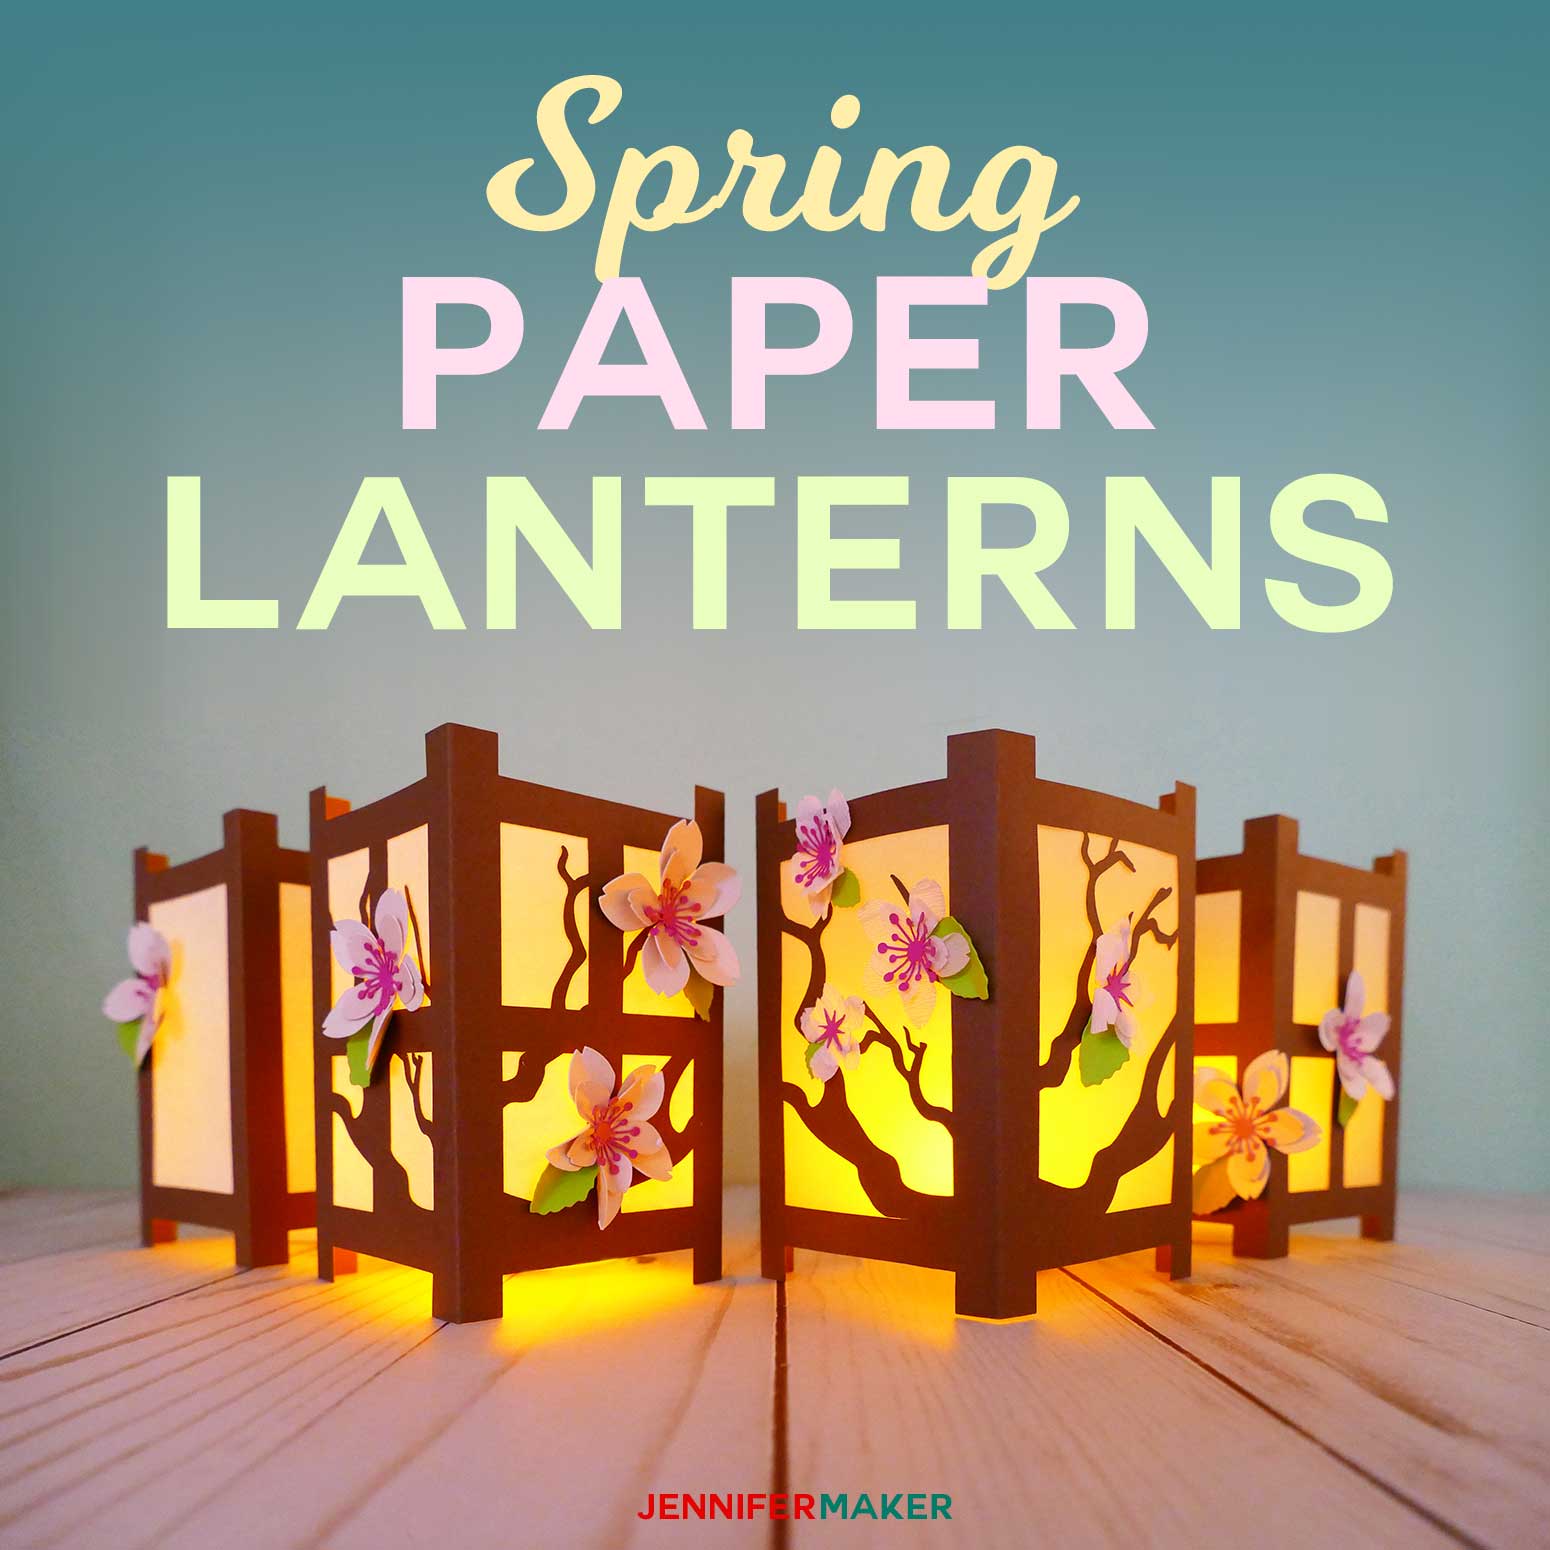 Japanese Paper Lanterns with Spring Cherry Blossoms - Get the free pattern and SVG cut files #luminaries #paperflowers #cricut